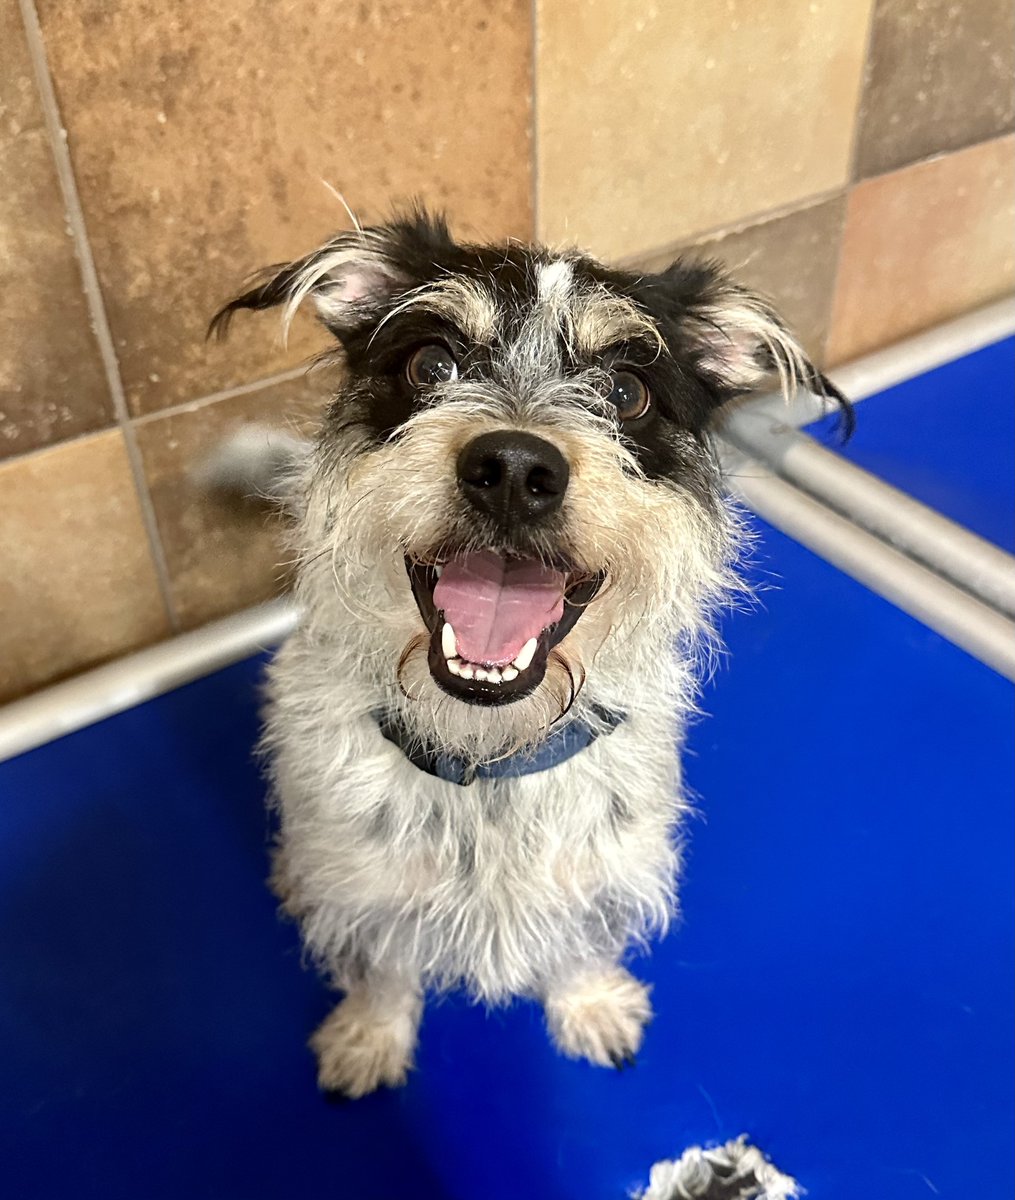 Cody wants you to know about all of the weekend festivities that you can be apart of when you head down to PetSmart this weekend 🤸‍♀️ He and all of his friends are going to show off and find their FUREVER FAMILY❣️ Come change the life of an animal in need by adopting this weekend🌈